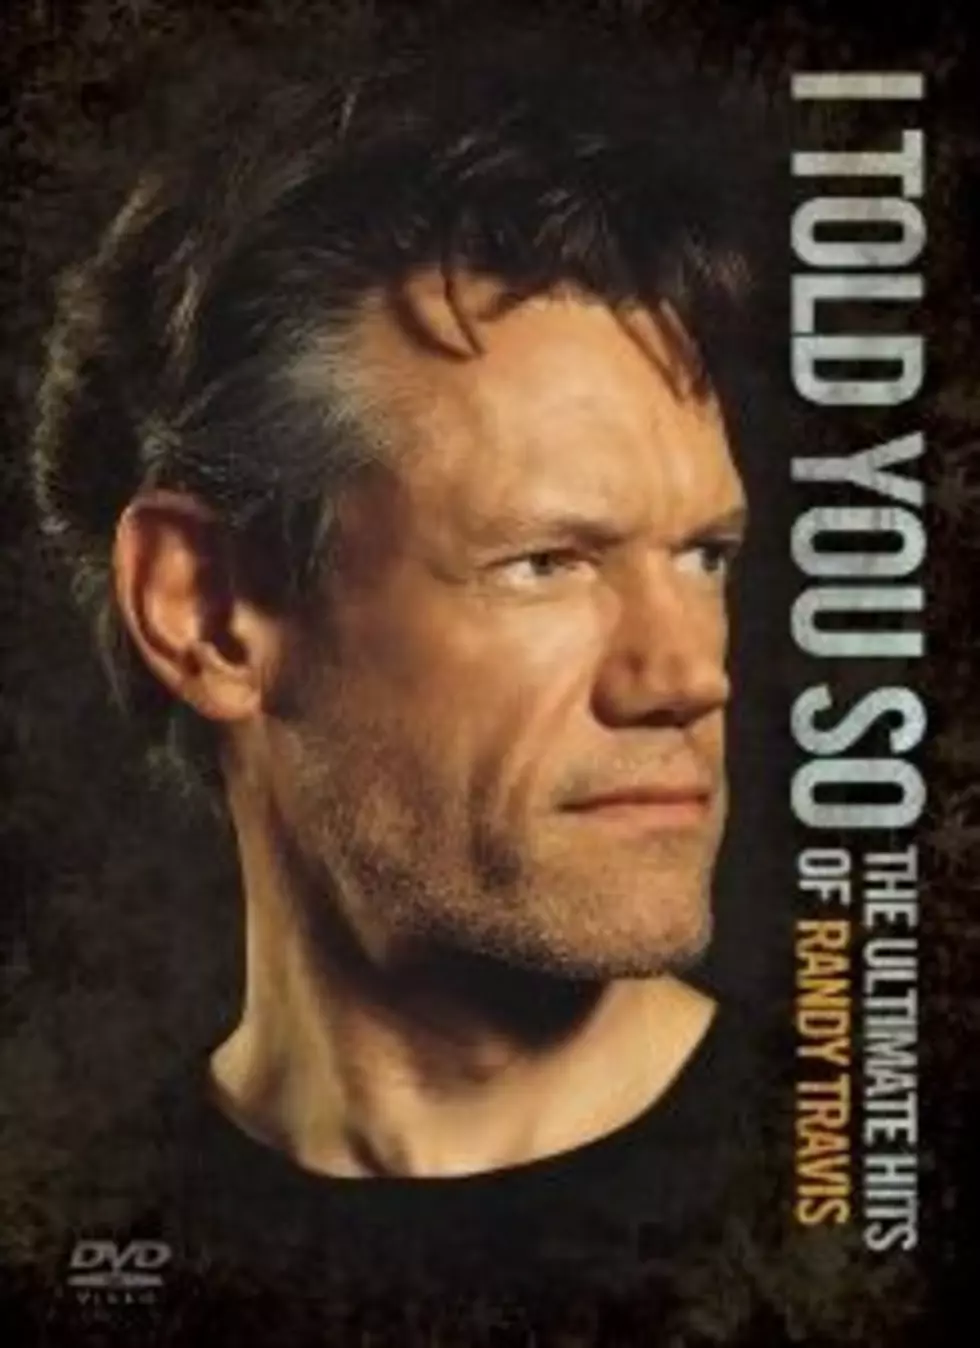 Sunday Morning Country Classic Spotlight Features Randy Travis